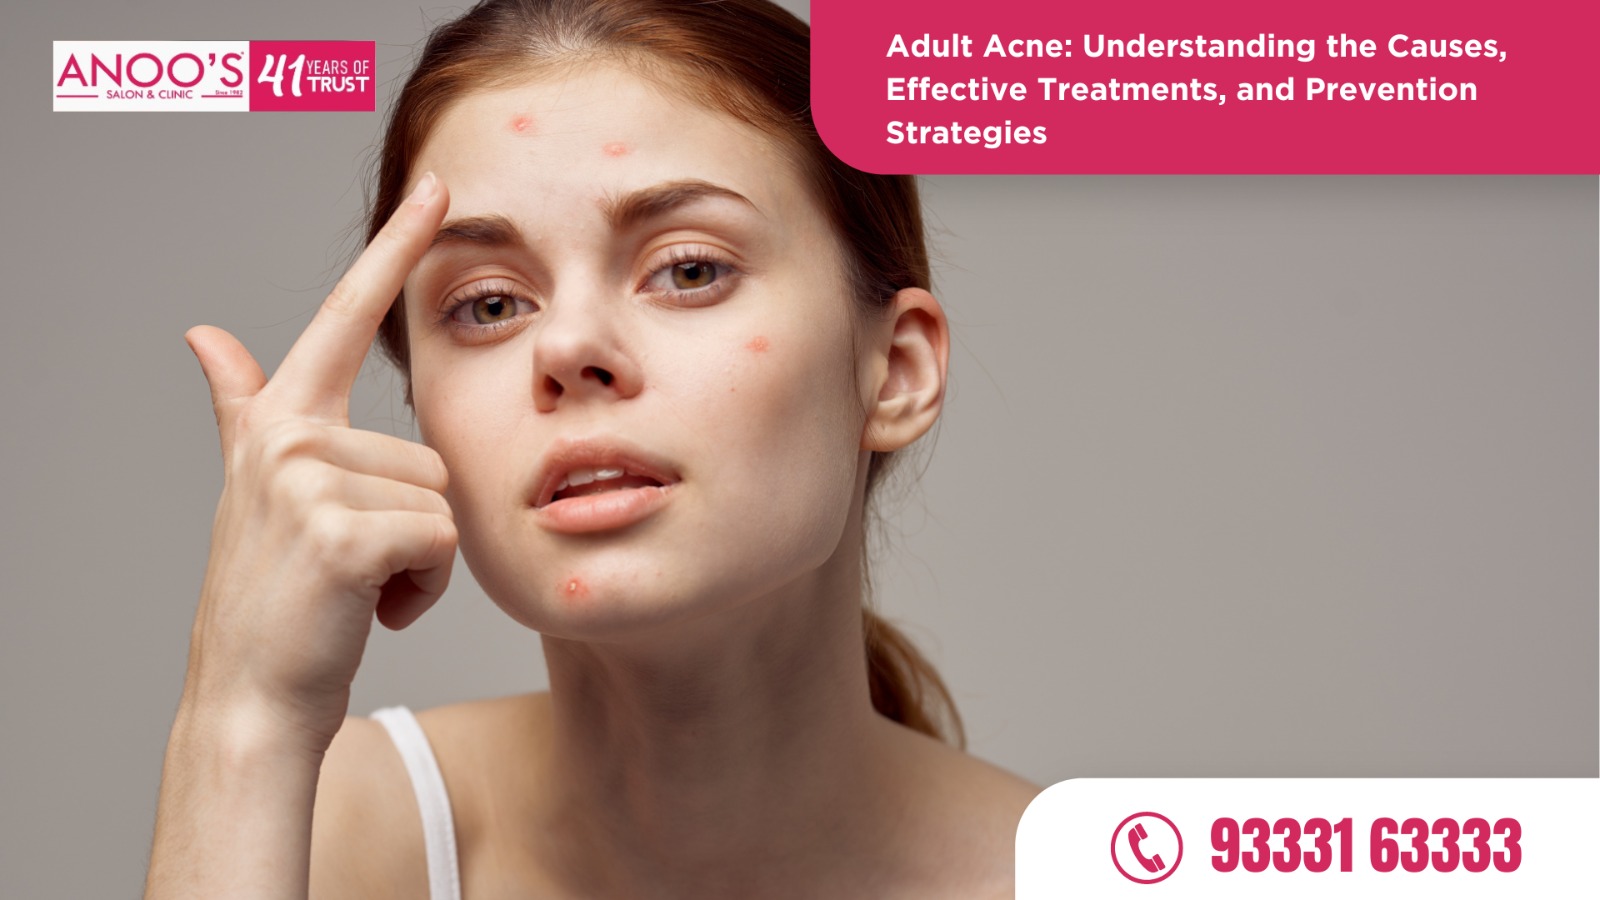 Adult Acne: Understanding the Causes, Effective Acne removal Treatments, and Prevention Strategies